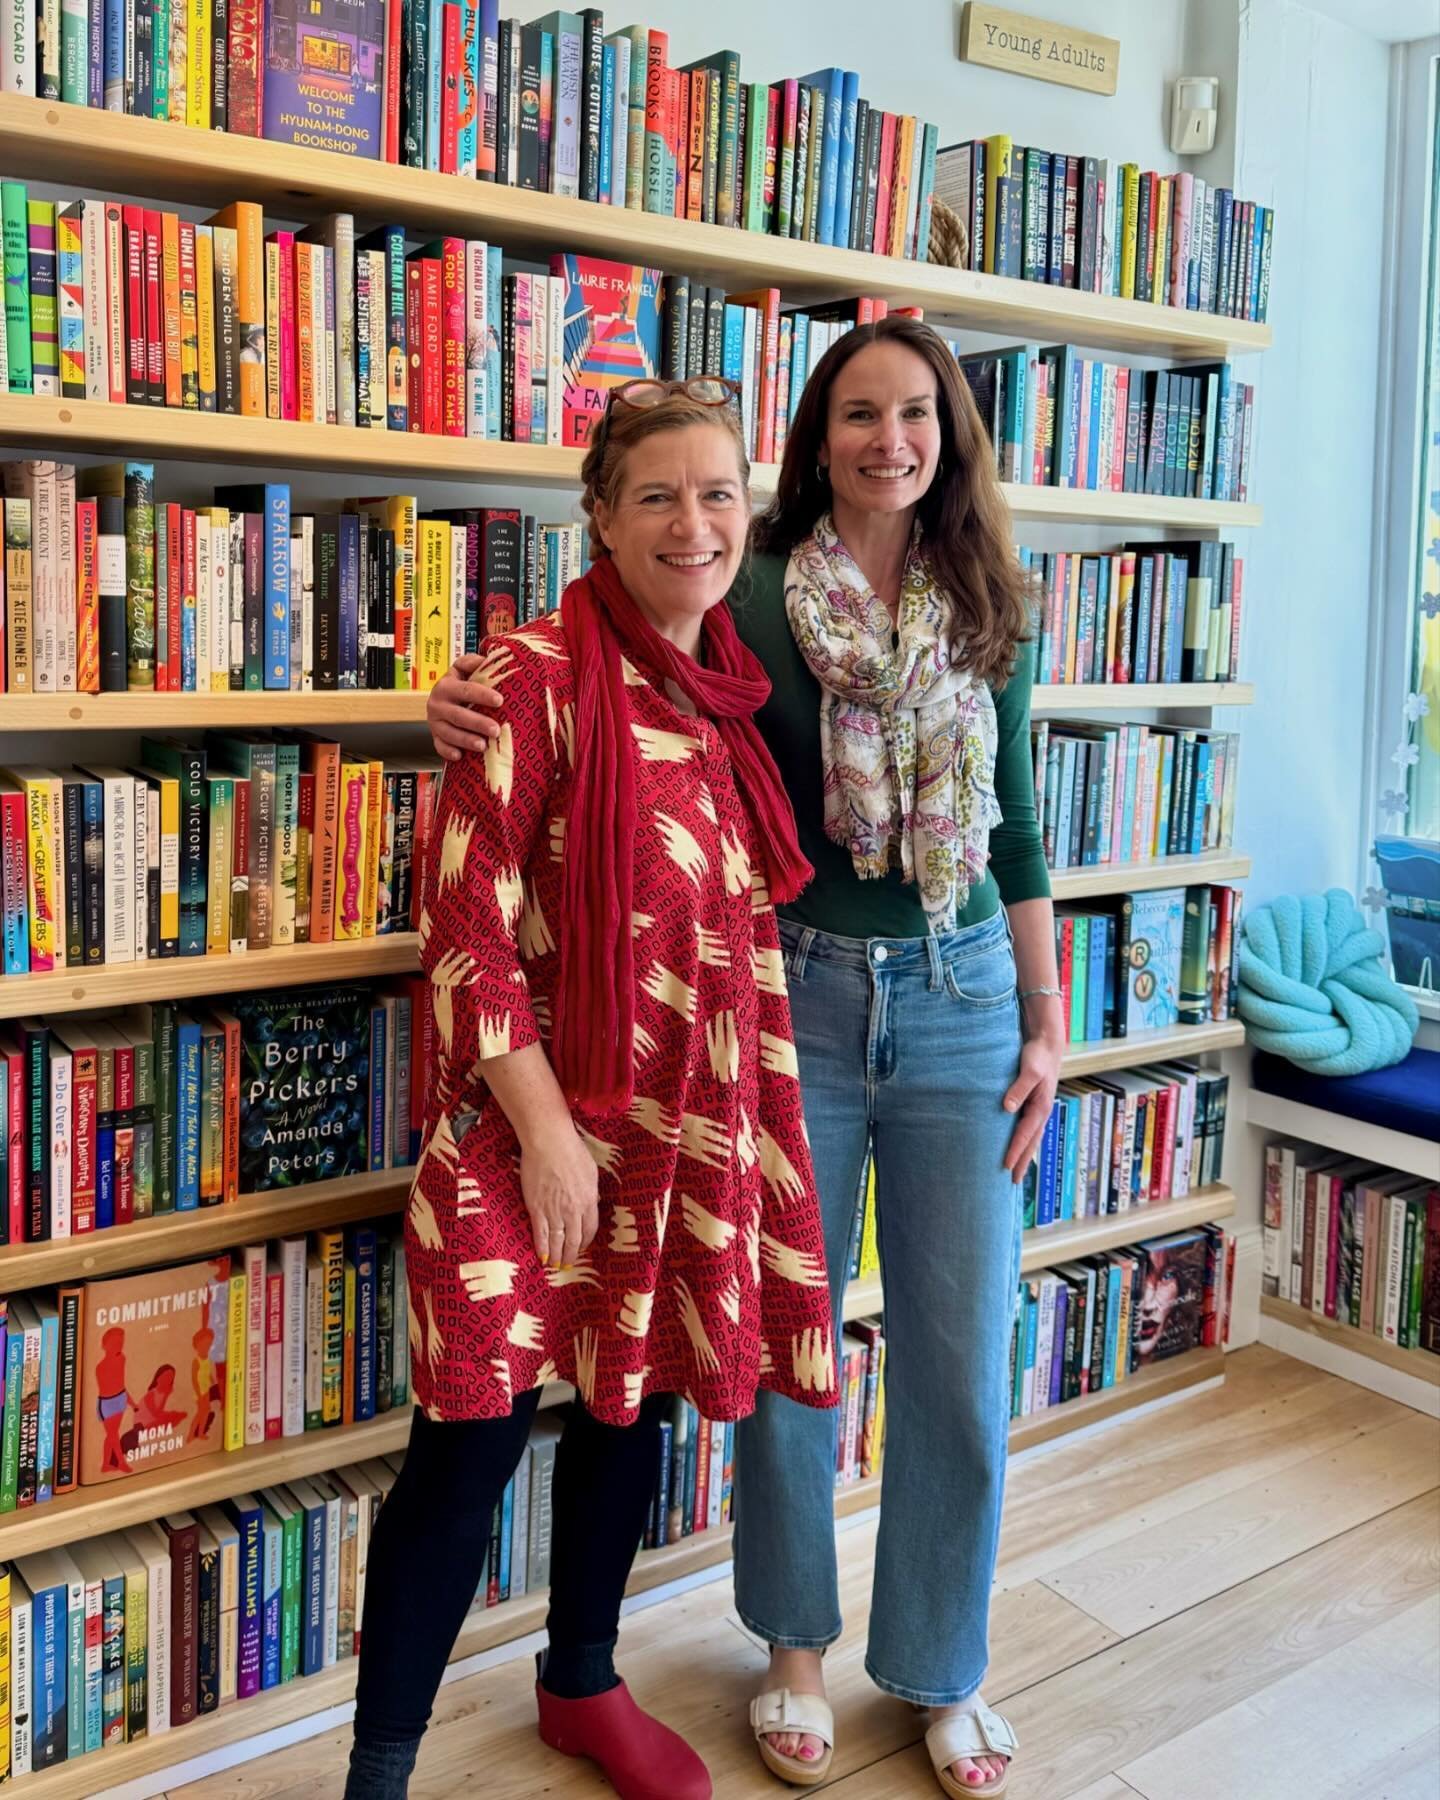 Seeing stars! ⭐️

Yup, we just had the most delightful visit with 2x Caldecott medalist, and NYT Bestselling author-illustrator, Sophie Blackall! We proudly carry a beautiful selection of her beloved children&rsquo;s books, including her newest relea